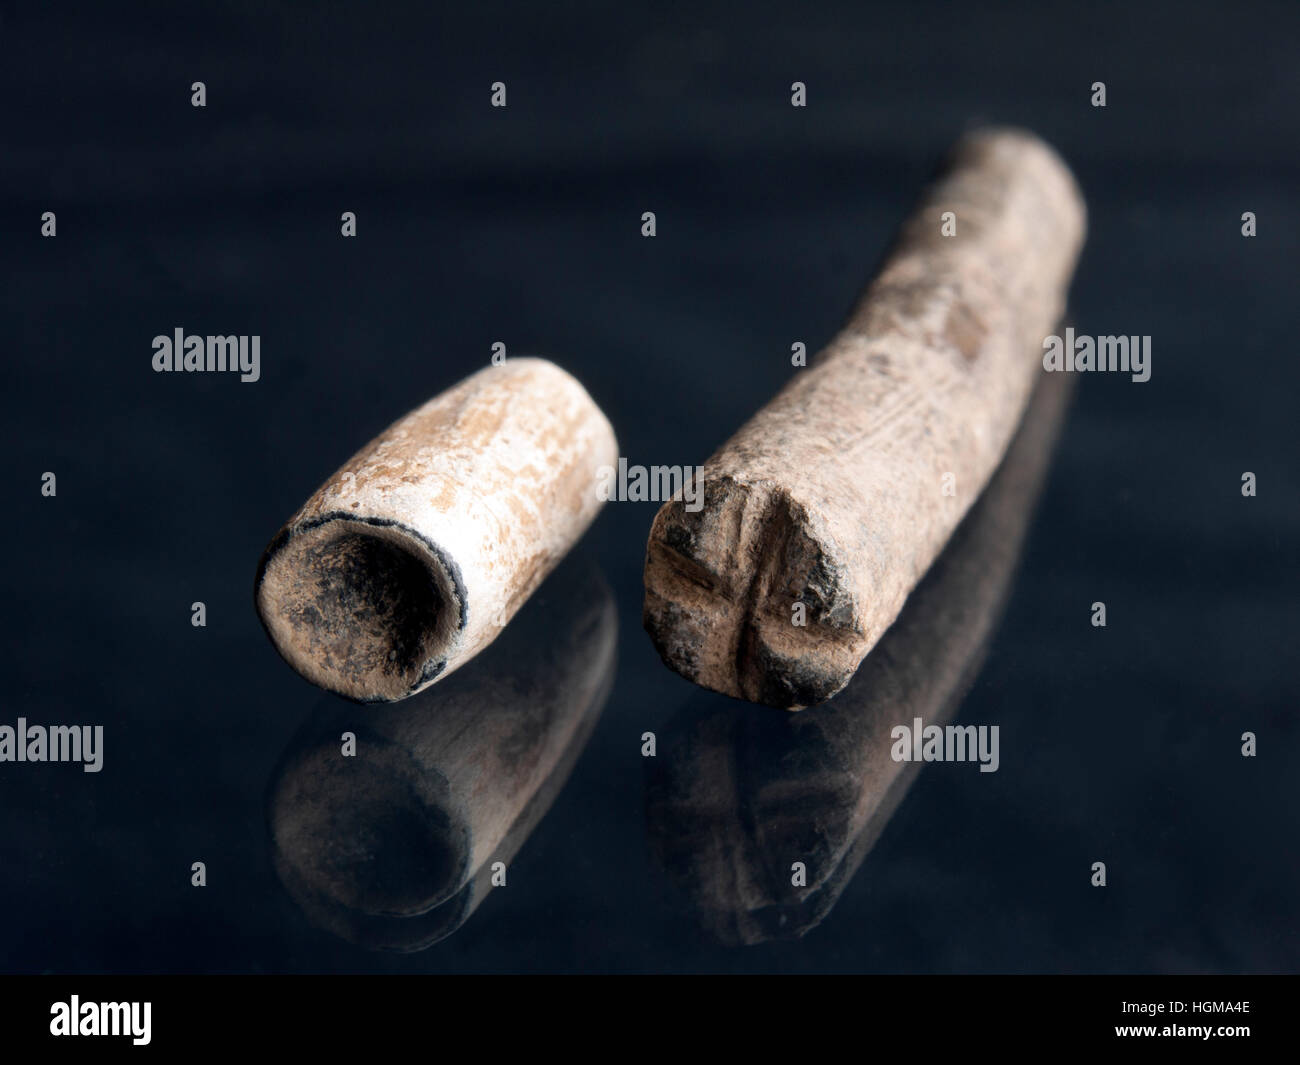 Anglo-Saxon potter's lead die or stamp with impressions/motifs. CLAY POTS Stock Photo